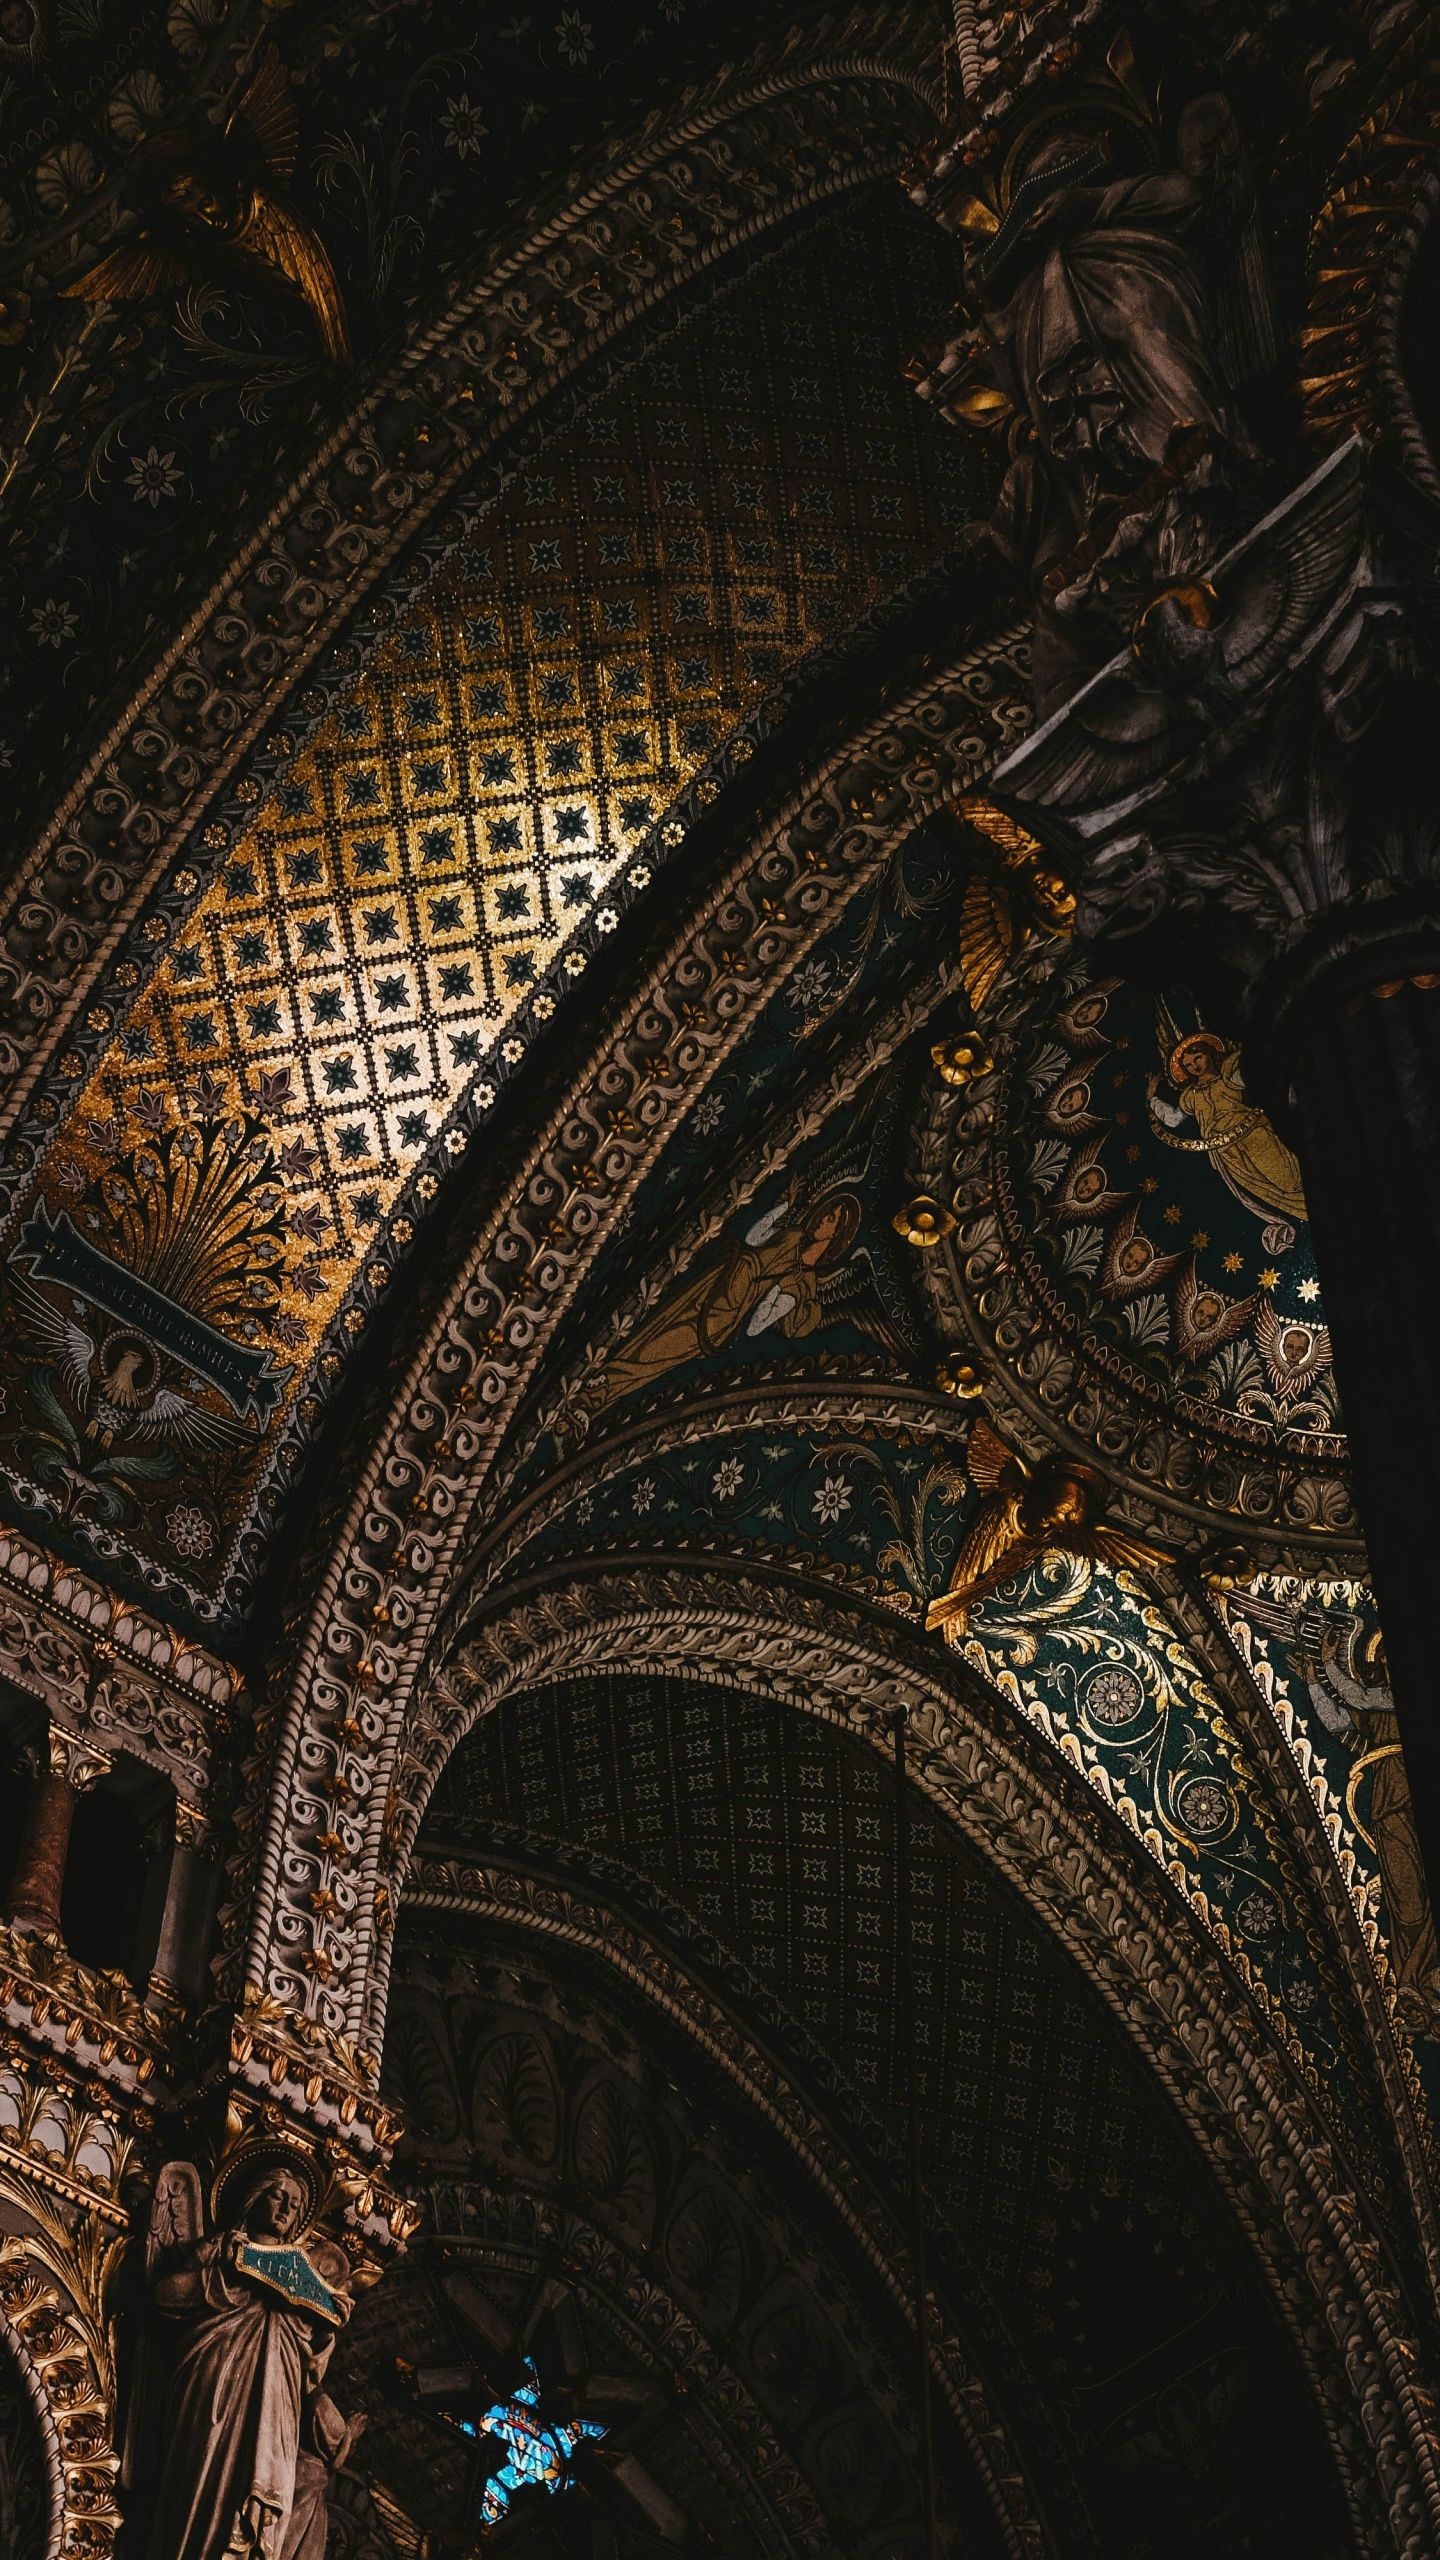 Gothic Architecture: Dome, Old building, Medieval construction style, Interior, Ornate decoration. 1440x2560 HD Wallpaper.